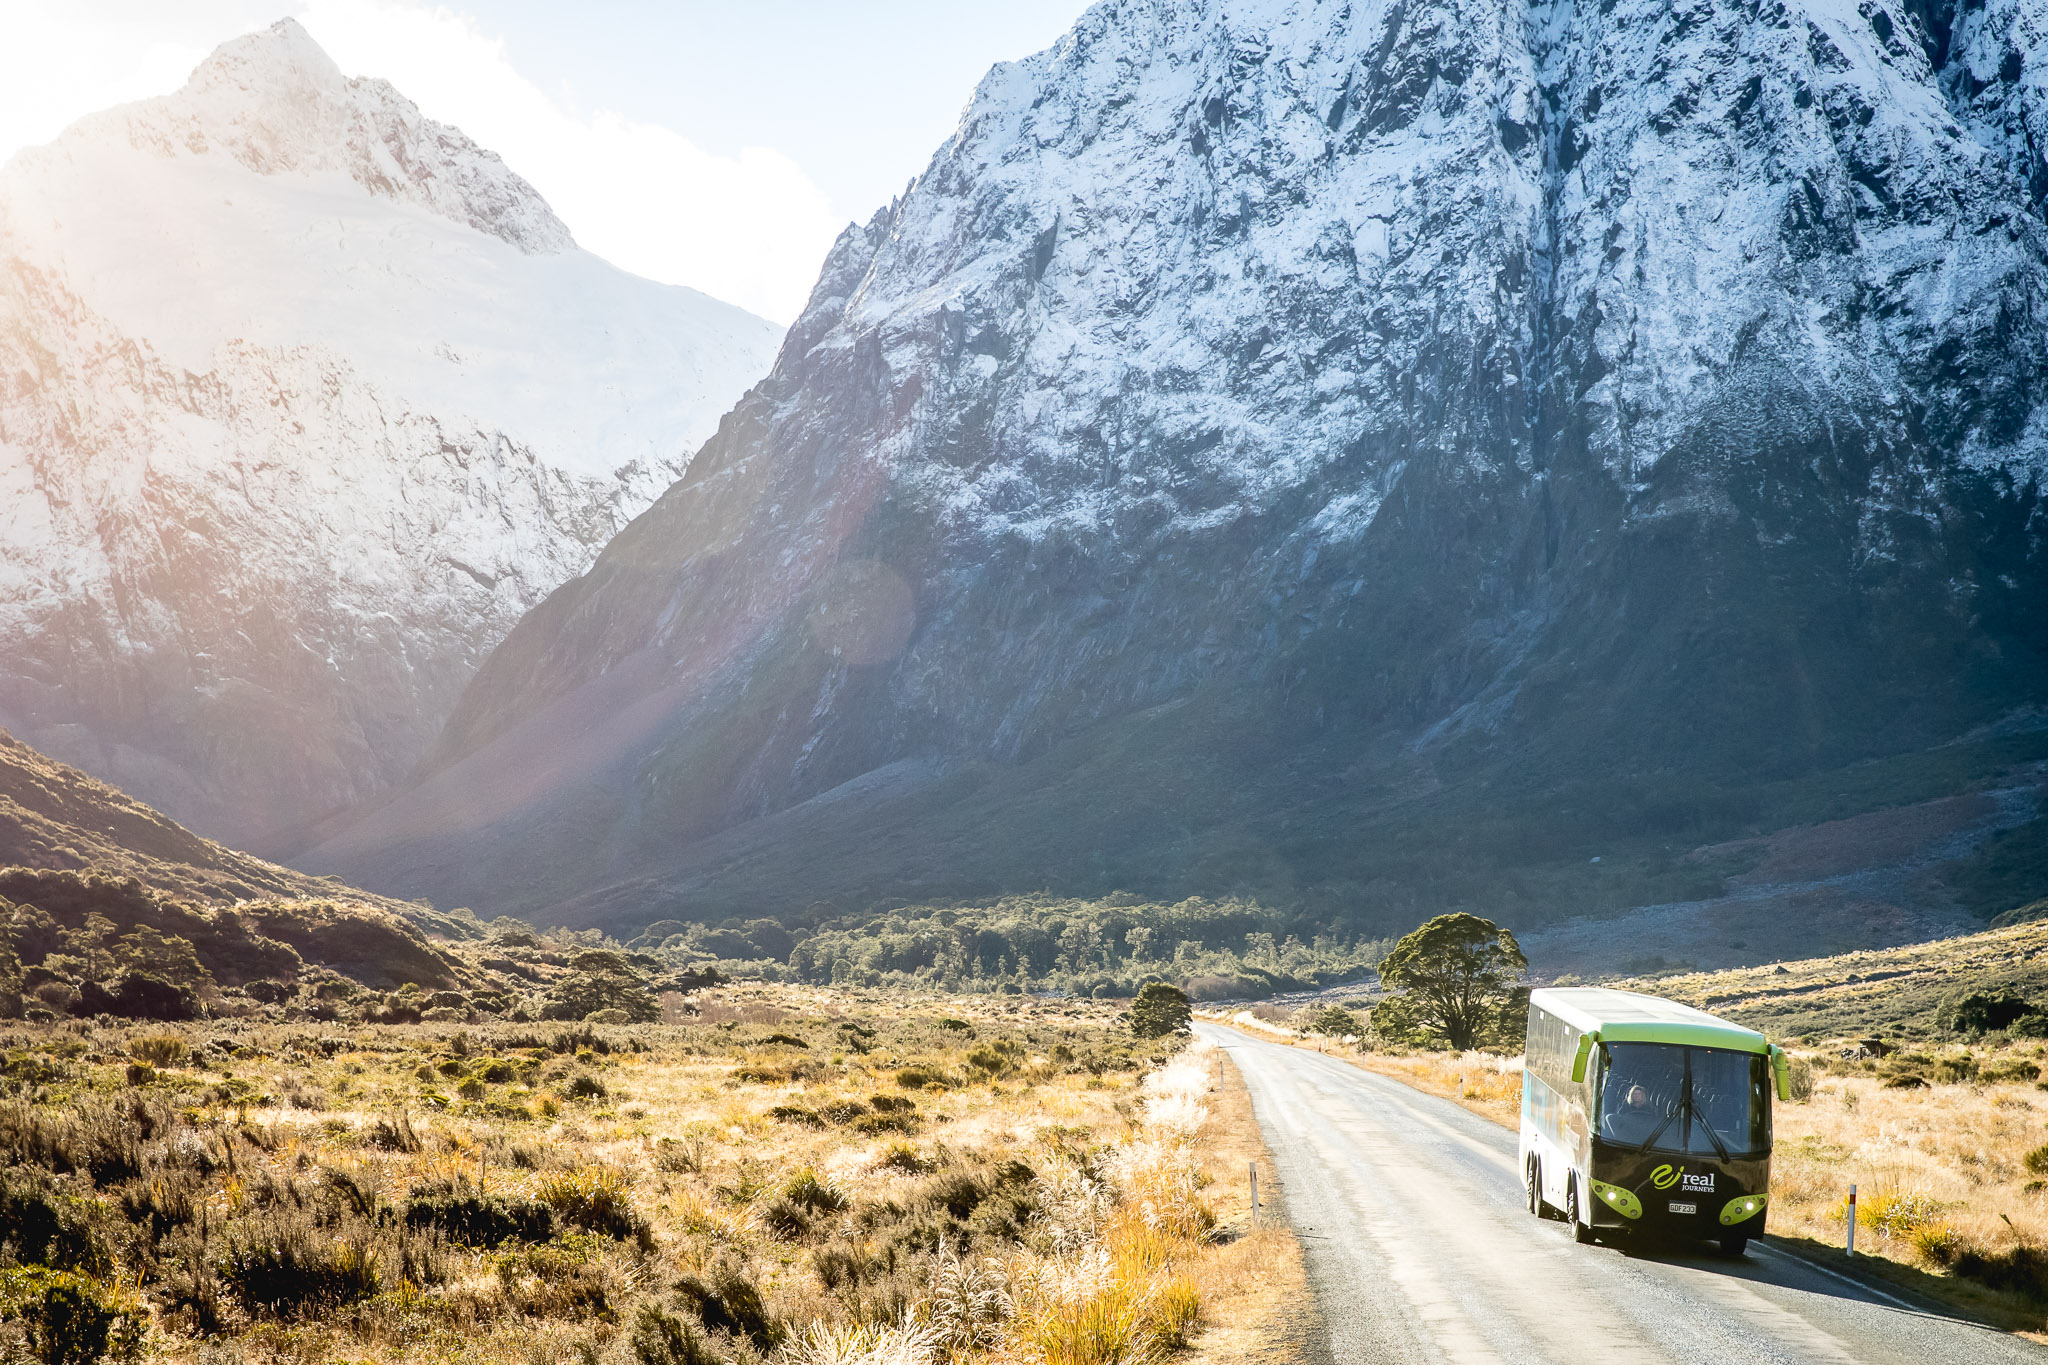 Coach on the way to Milford Sound with snow capped mountains